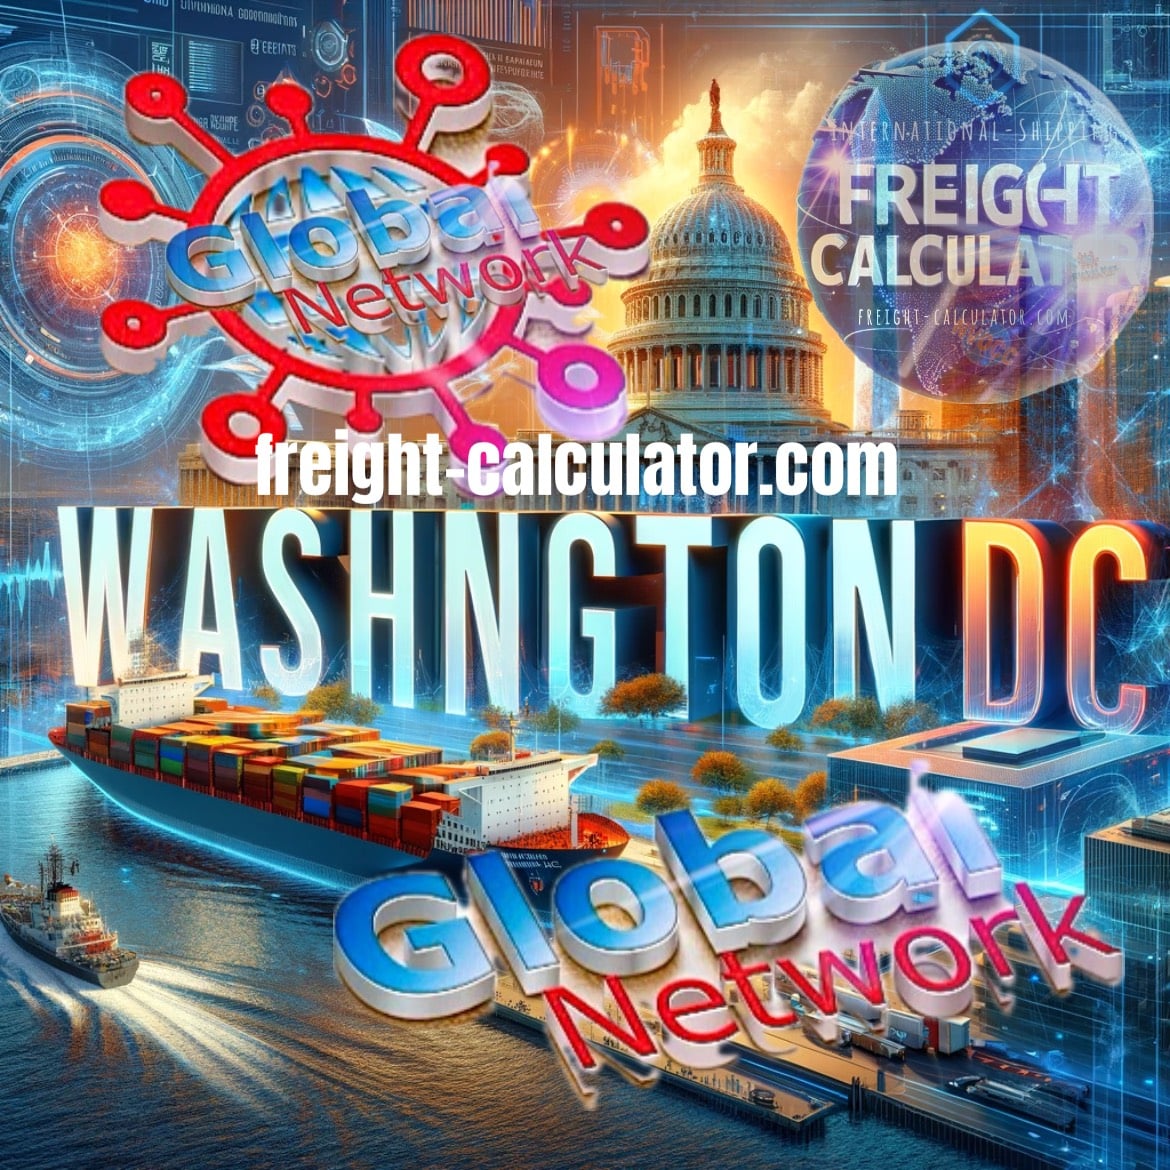 Container Shipping From WASHINGTON-DC